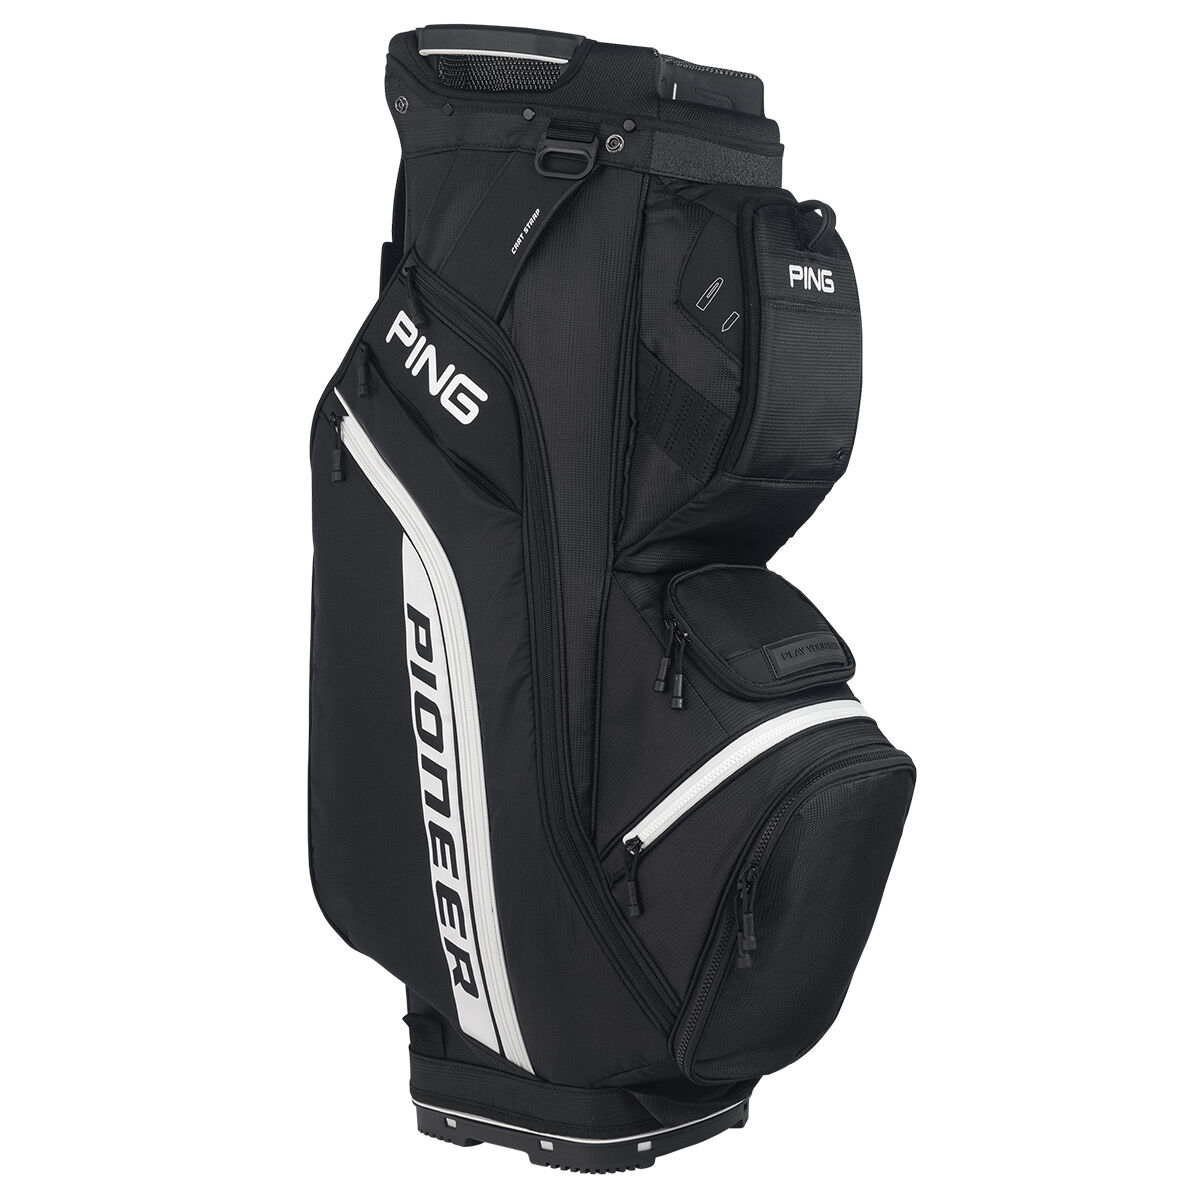 Ping Black and White Lightweight Pioneer 214 Golf Cart Bag 2022 | American Golf, One Size